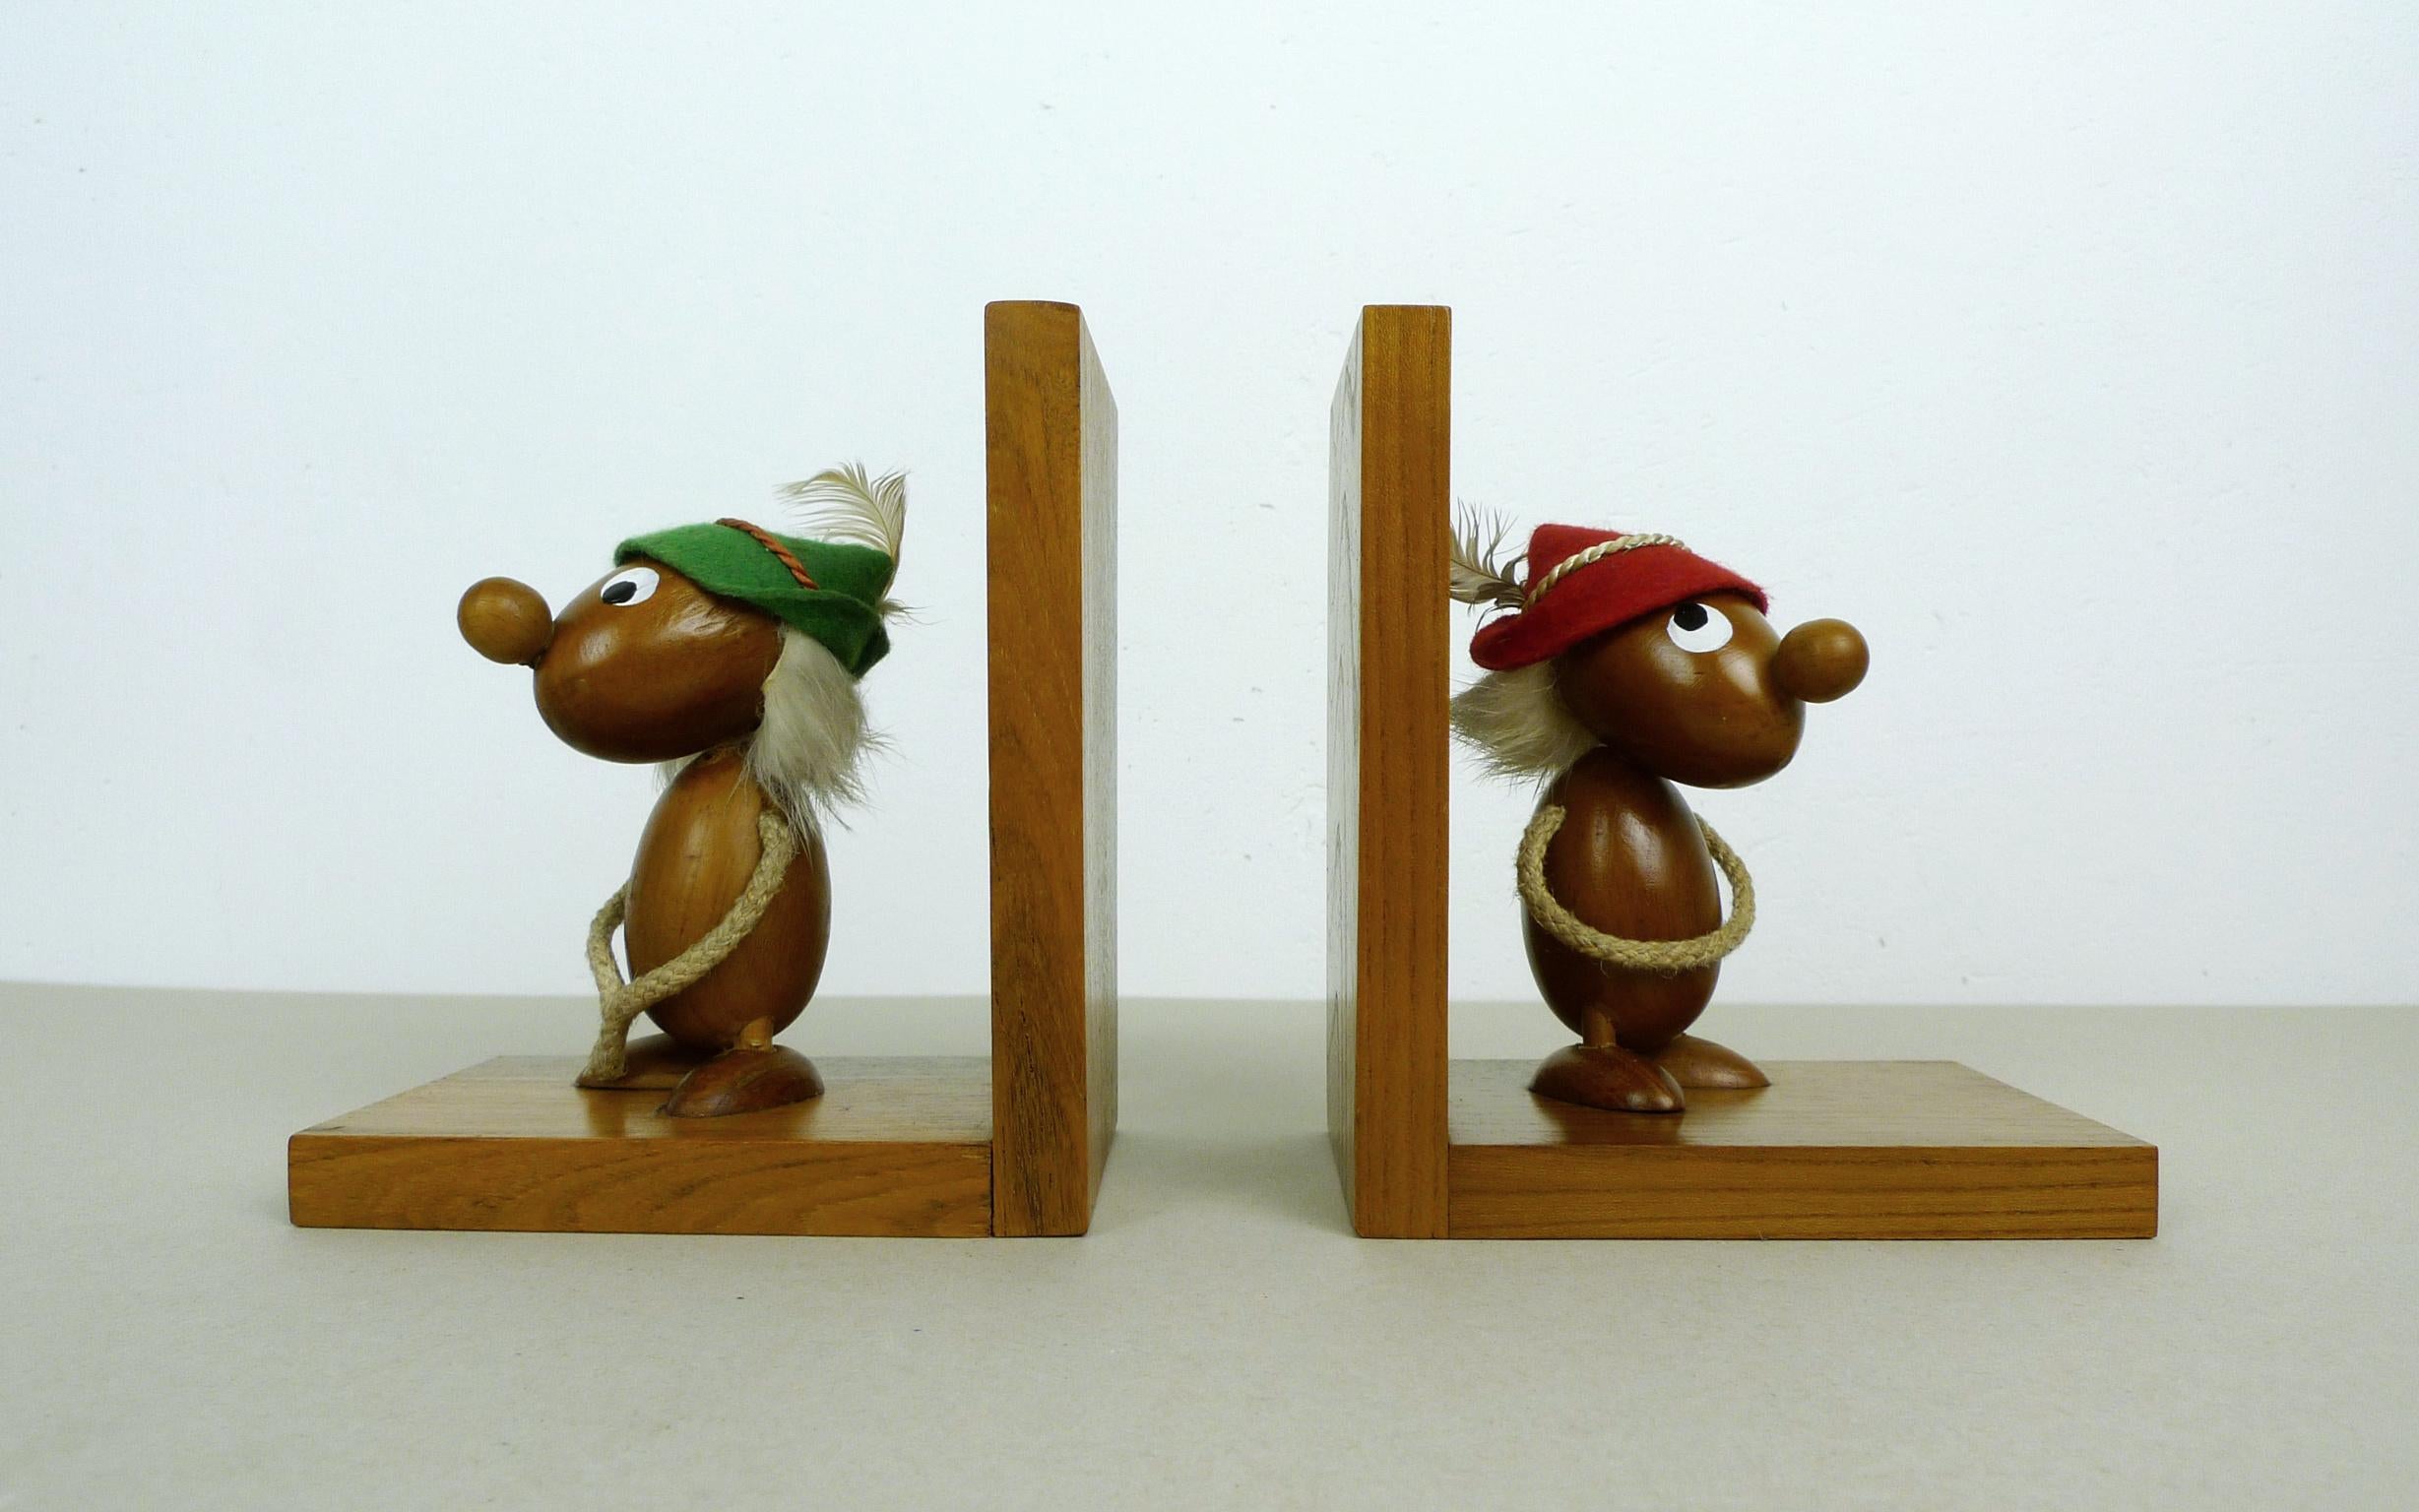 Felt Pair of Italian Bookends with Teak Figurines from Ciola, 1950s For Sale